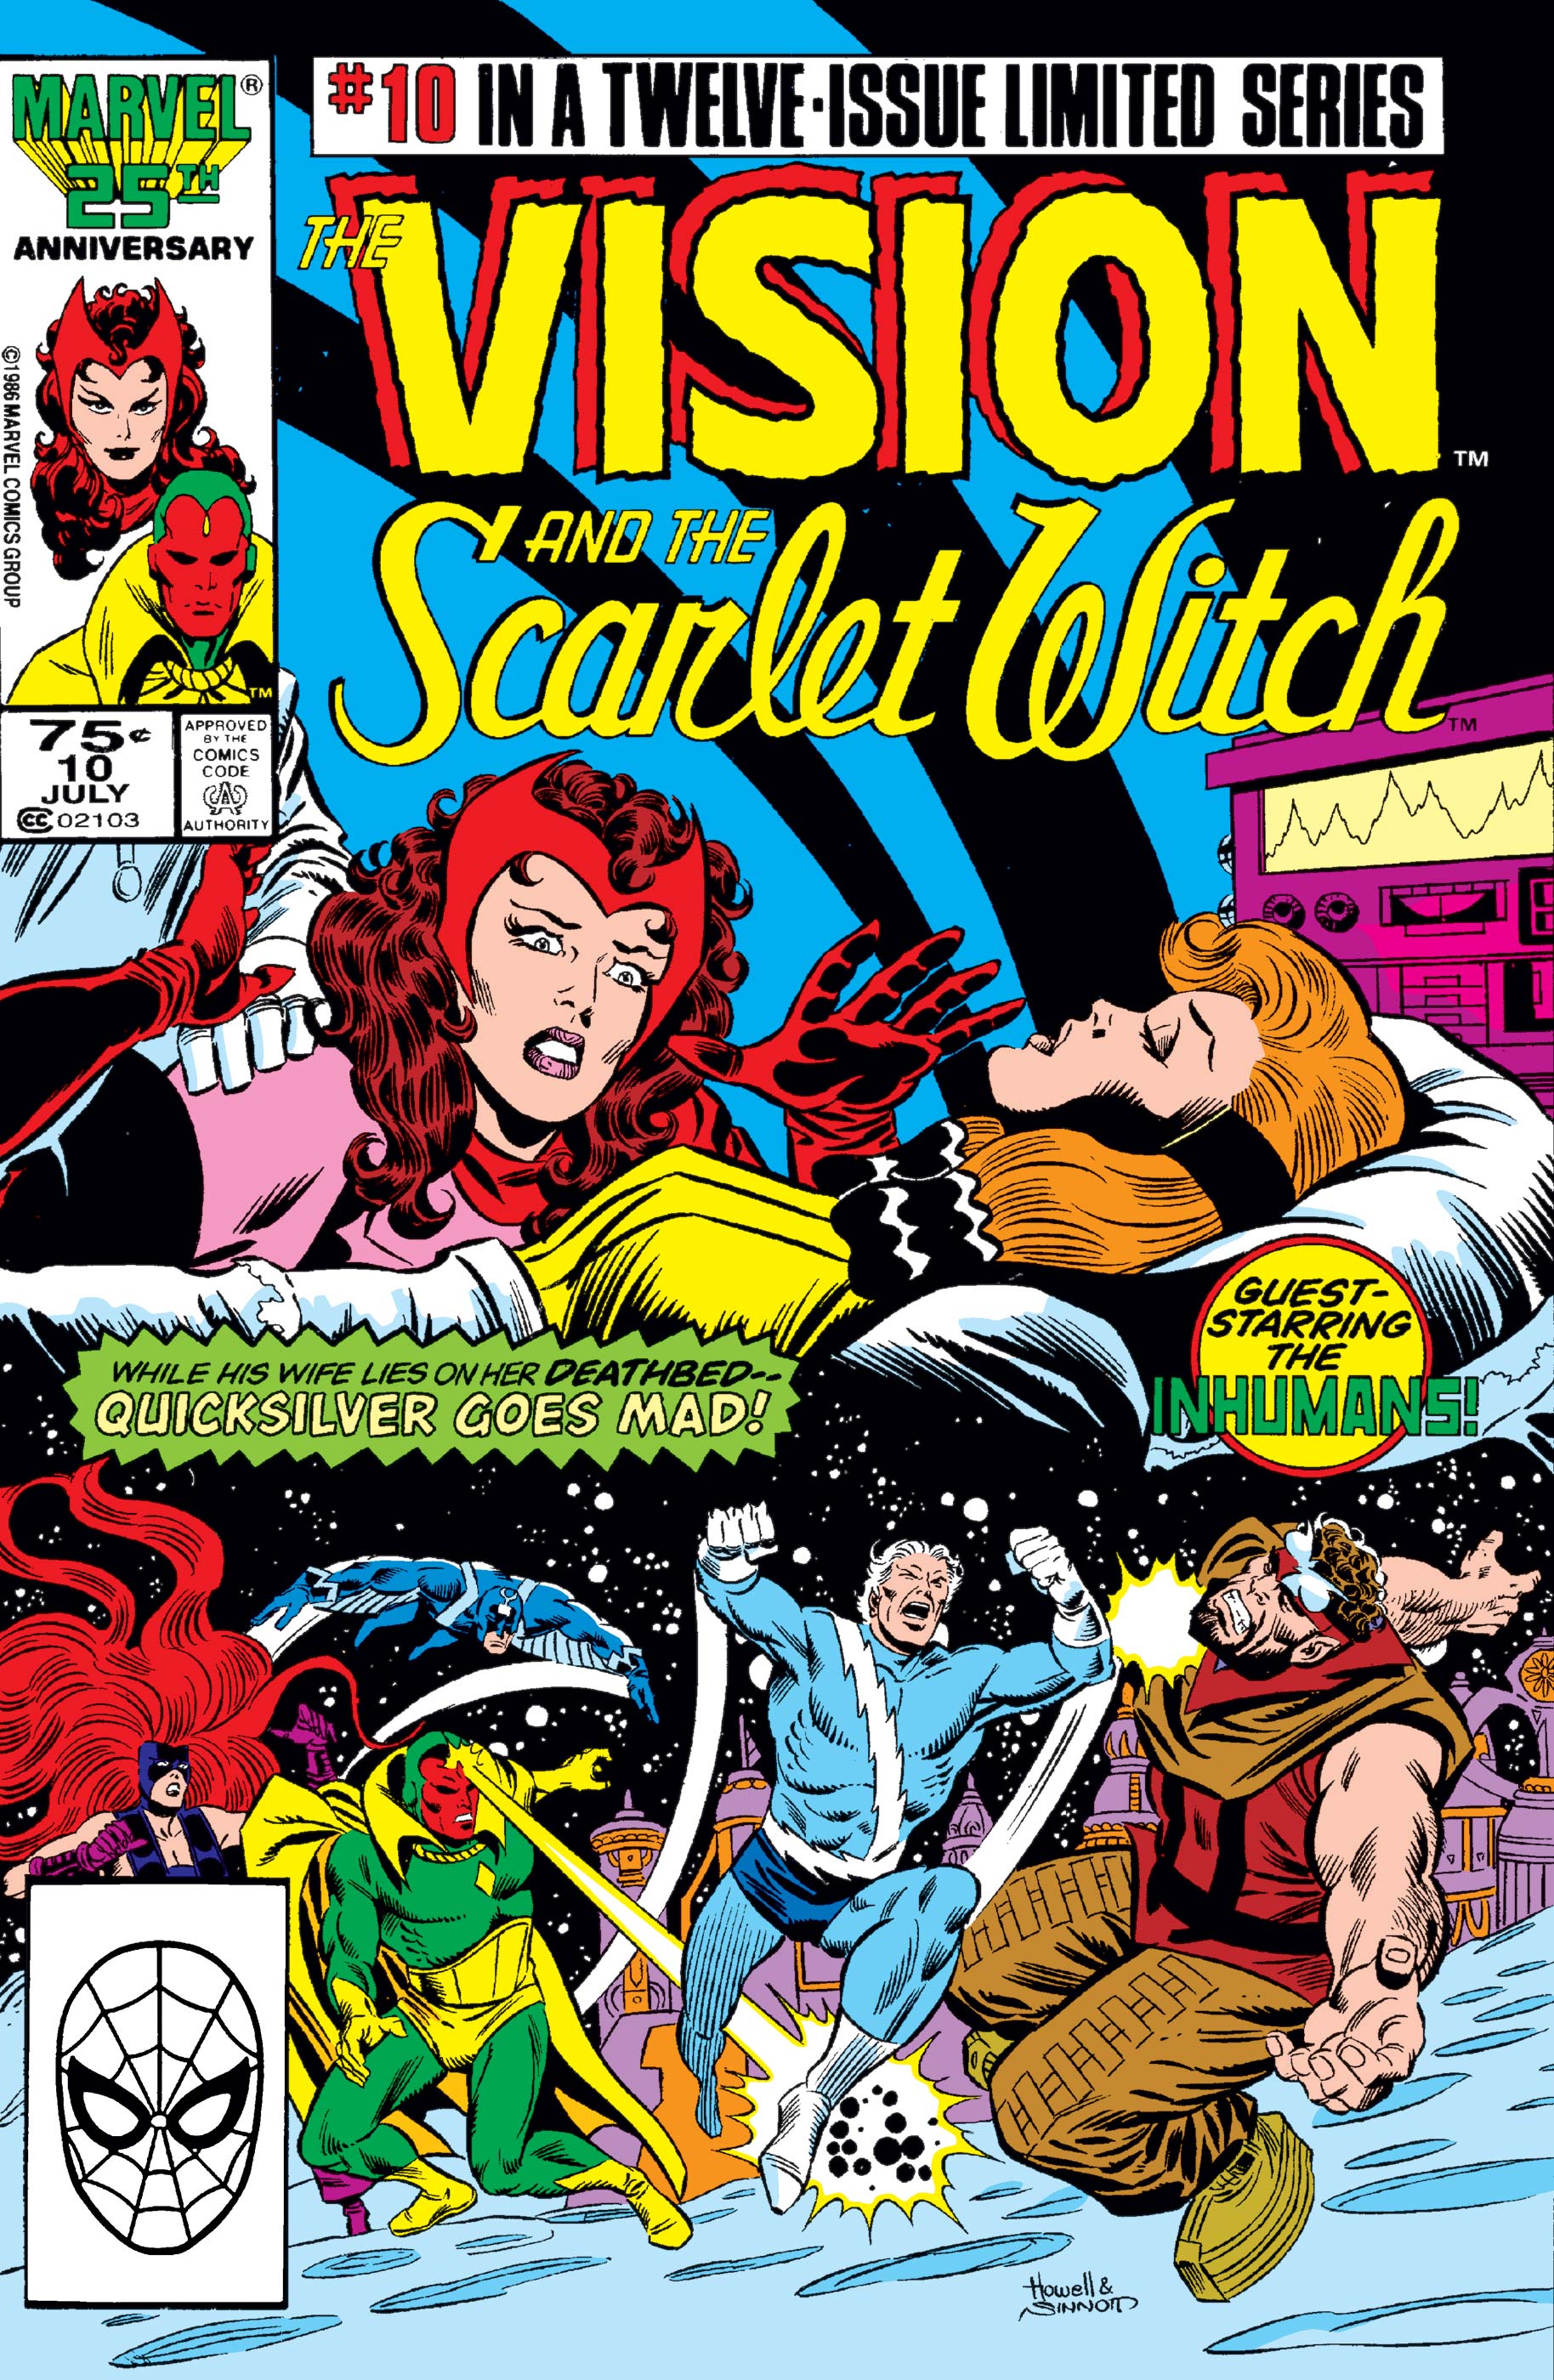 Vision and the Scarlet Witch (1985) #10